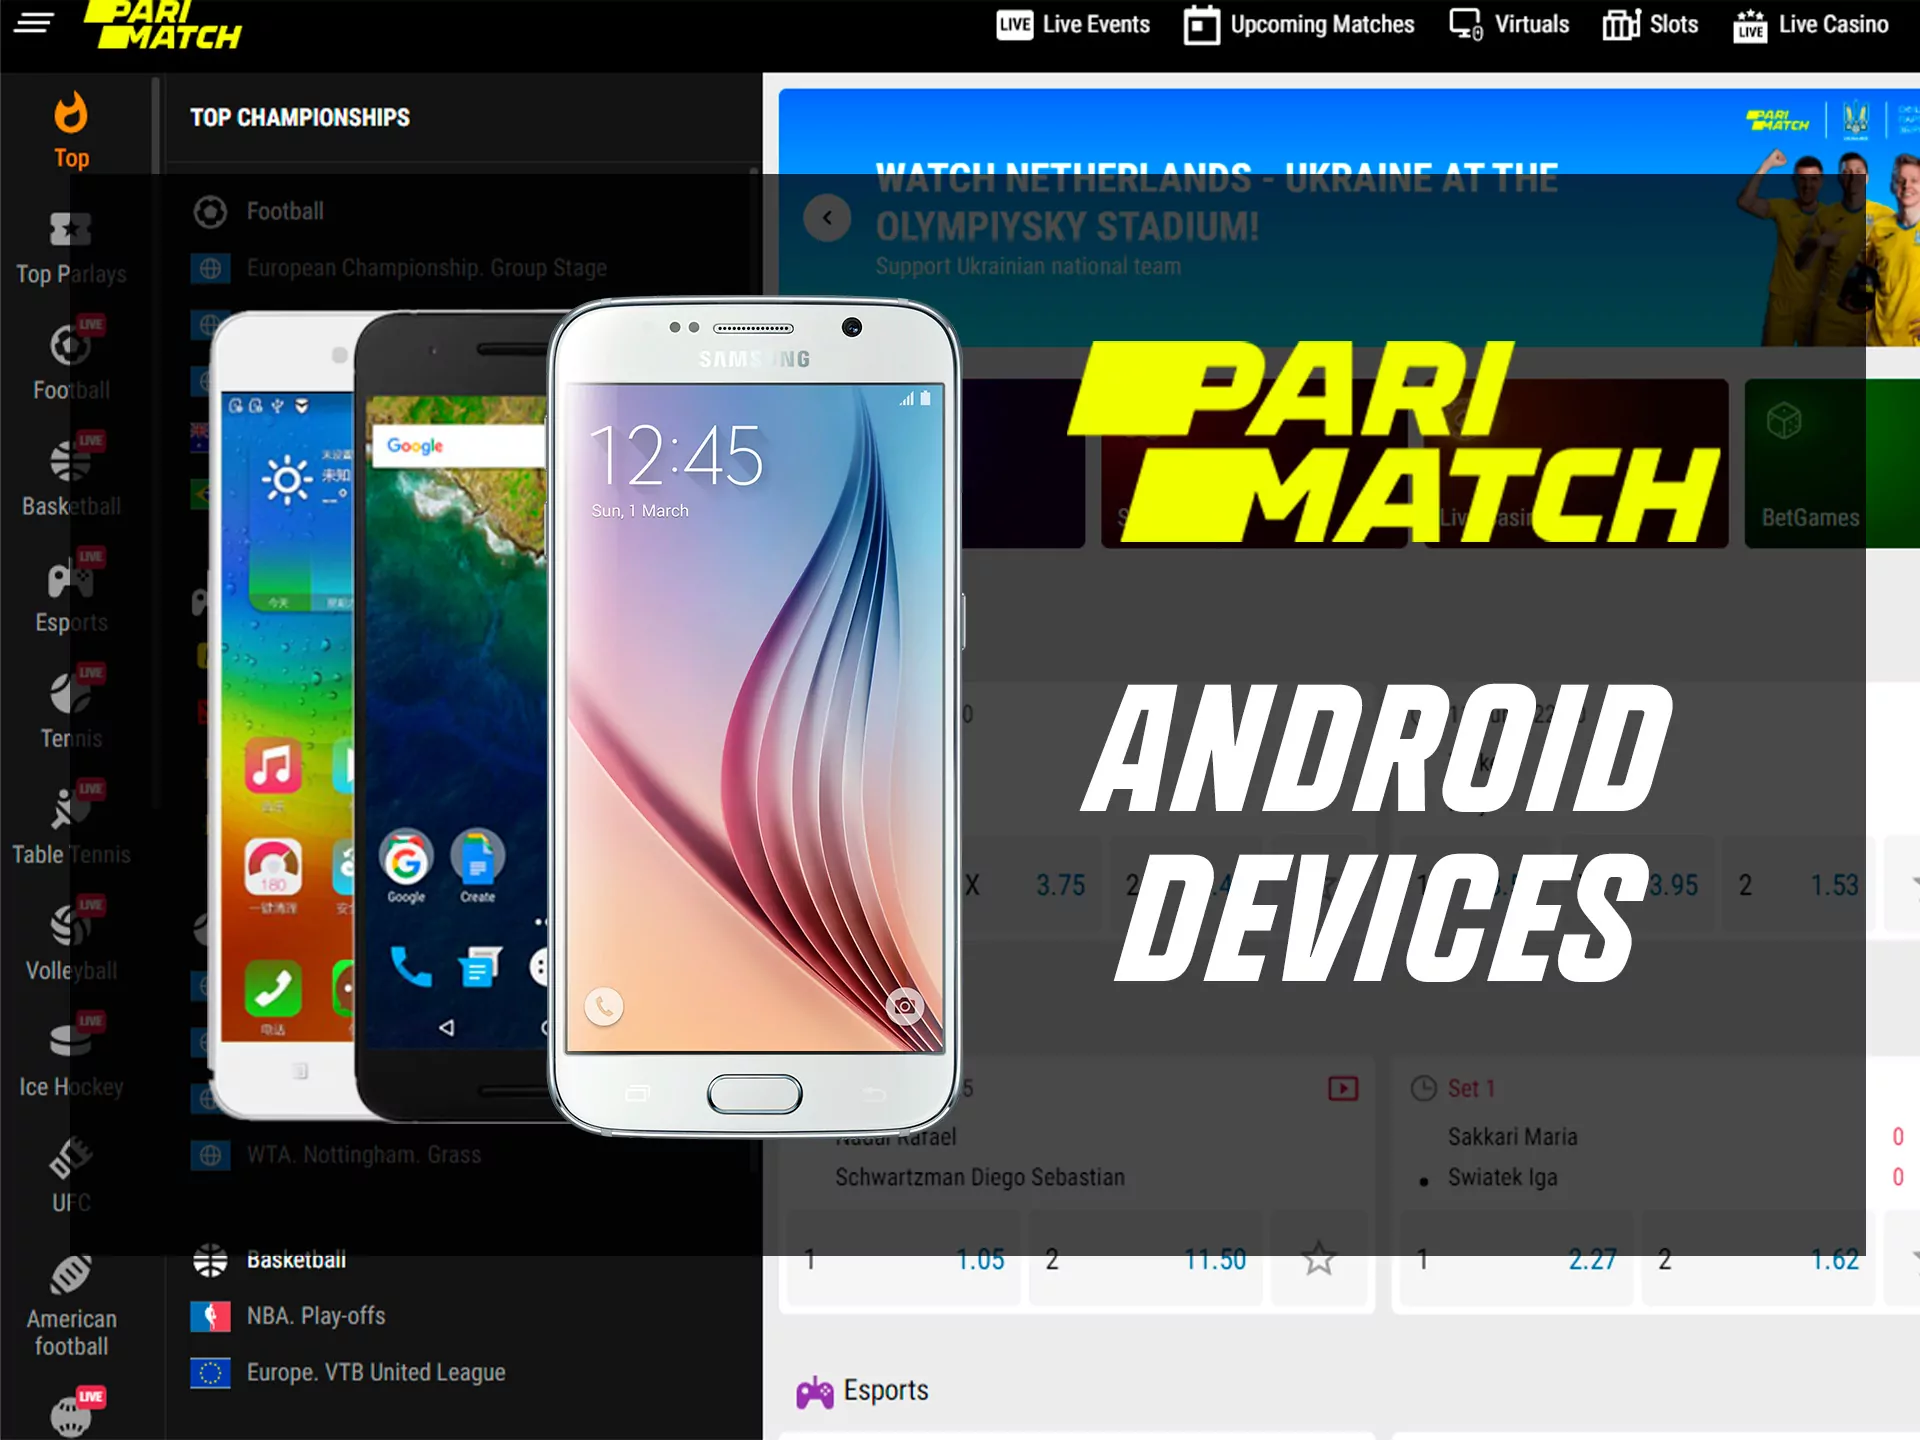 Parimatch mobile app is available on the most modern Android devices.